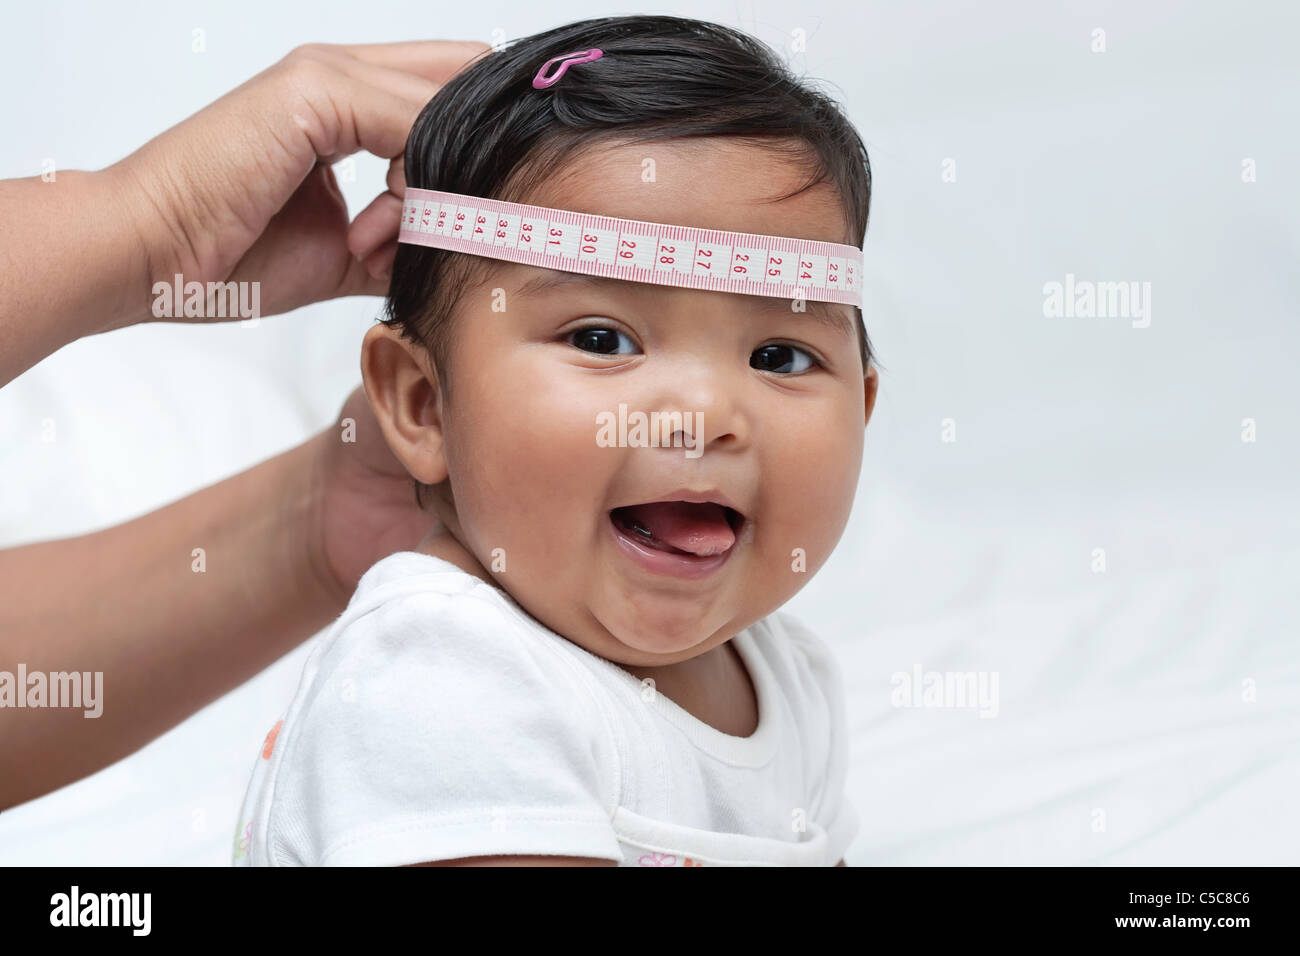 Cute baby with tape measure on head, pediatric exam measuring growth Stock Photo